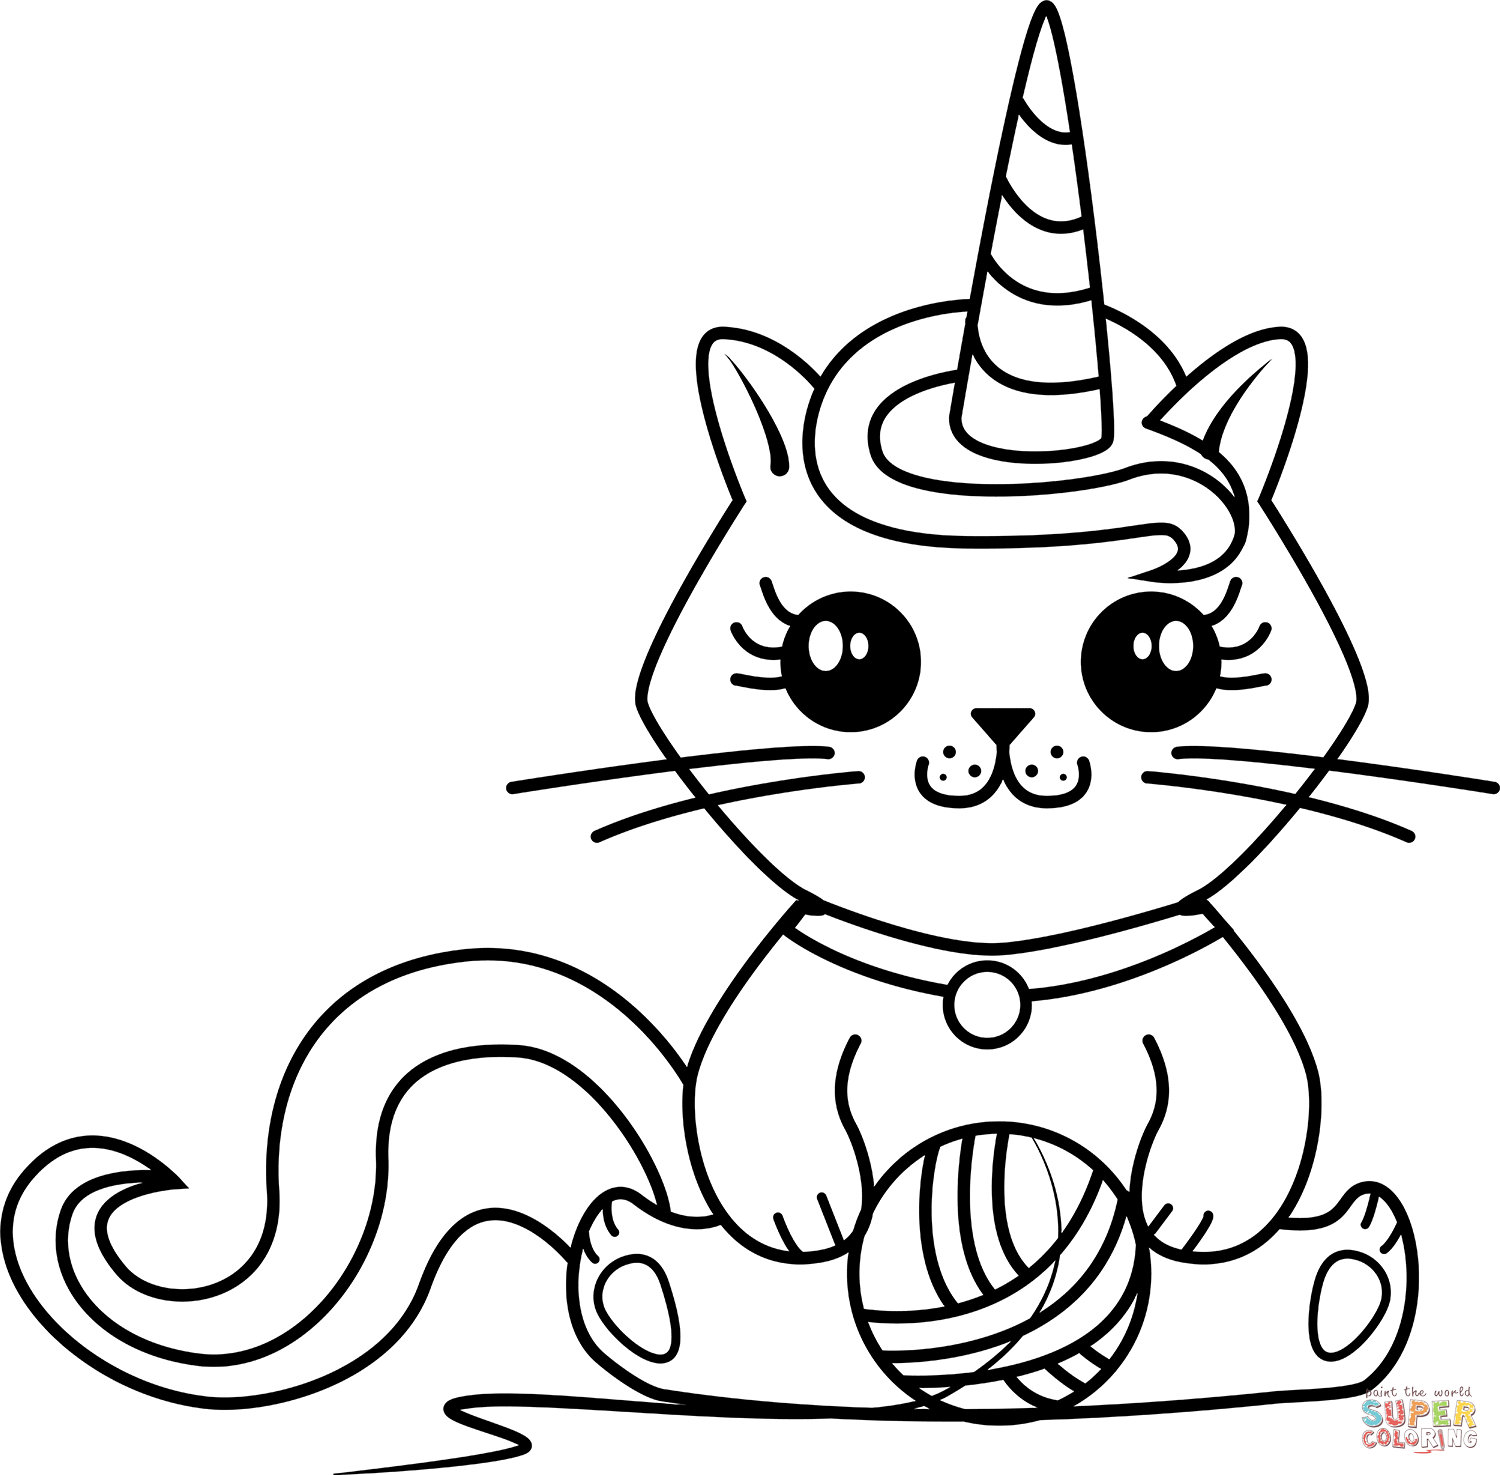 Unicorn kitty coloring page free printable coloring pages